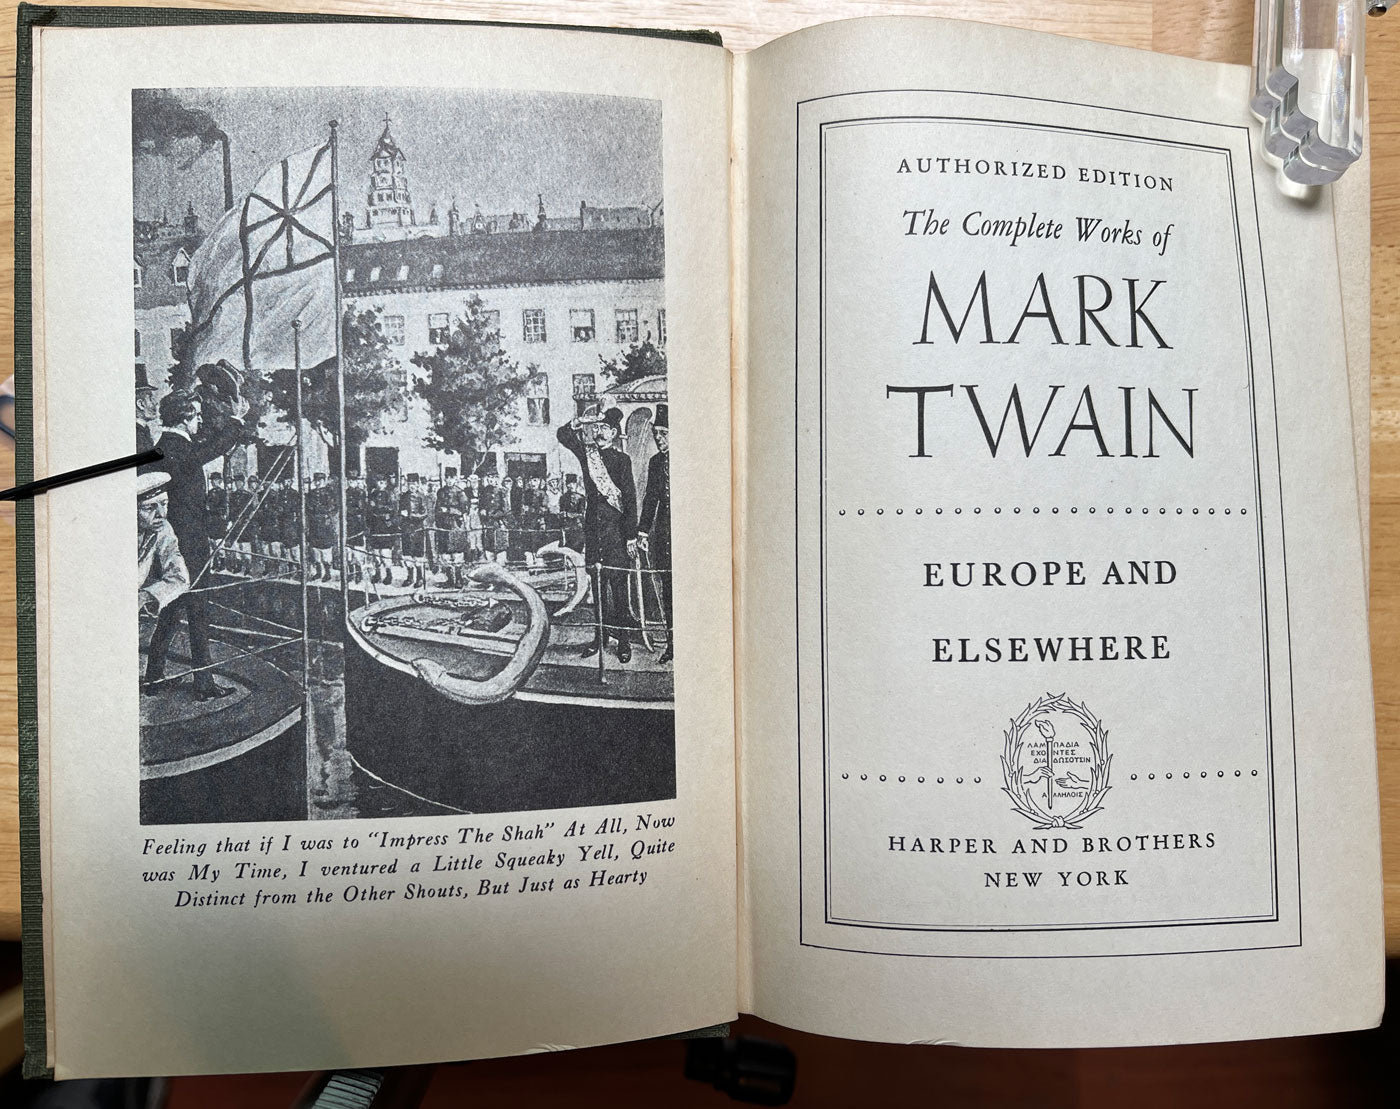 Mark Twain Europe and Elsewhere title page